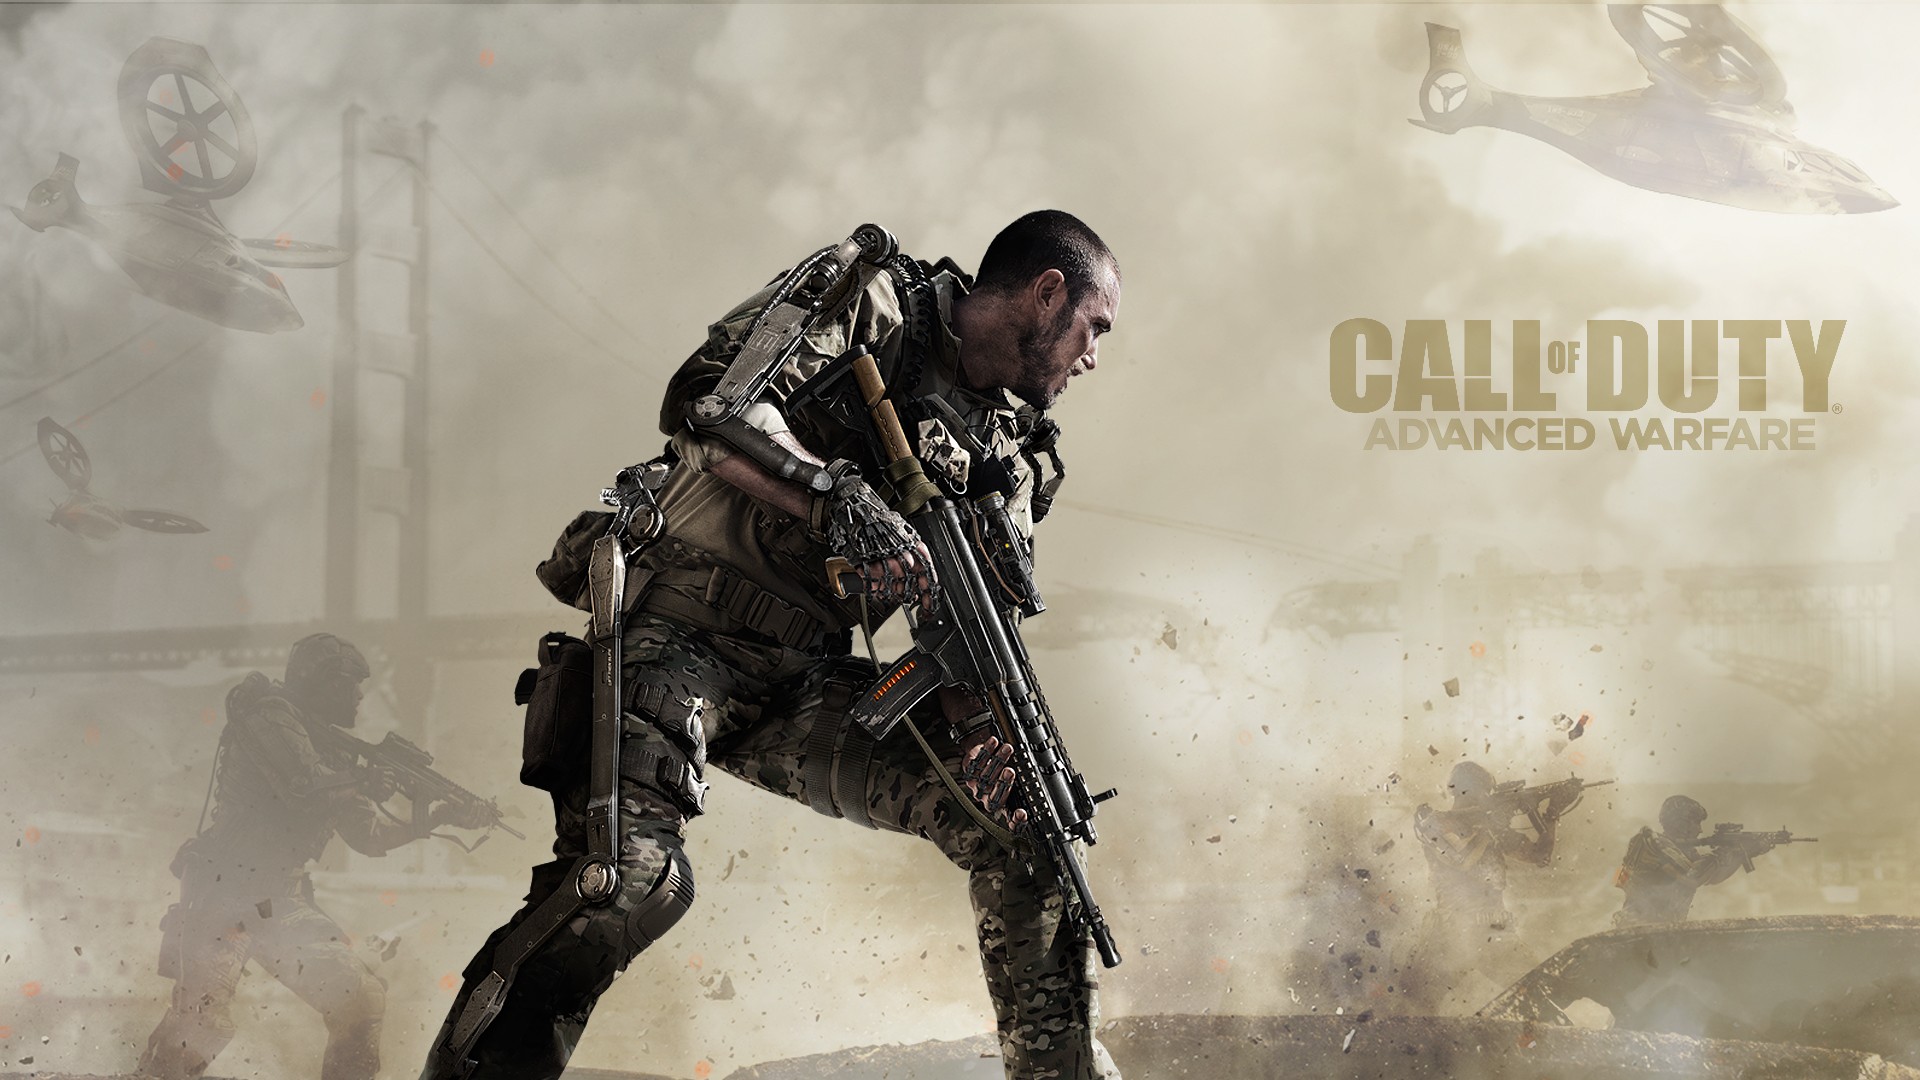 call of duty wallpaper 1920x1080,action adventure game,soldier,pc game,shooter game,army